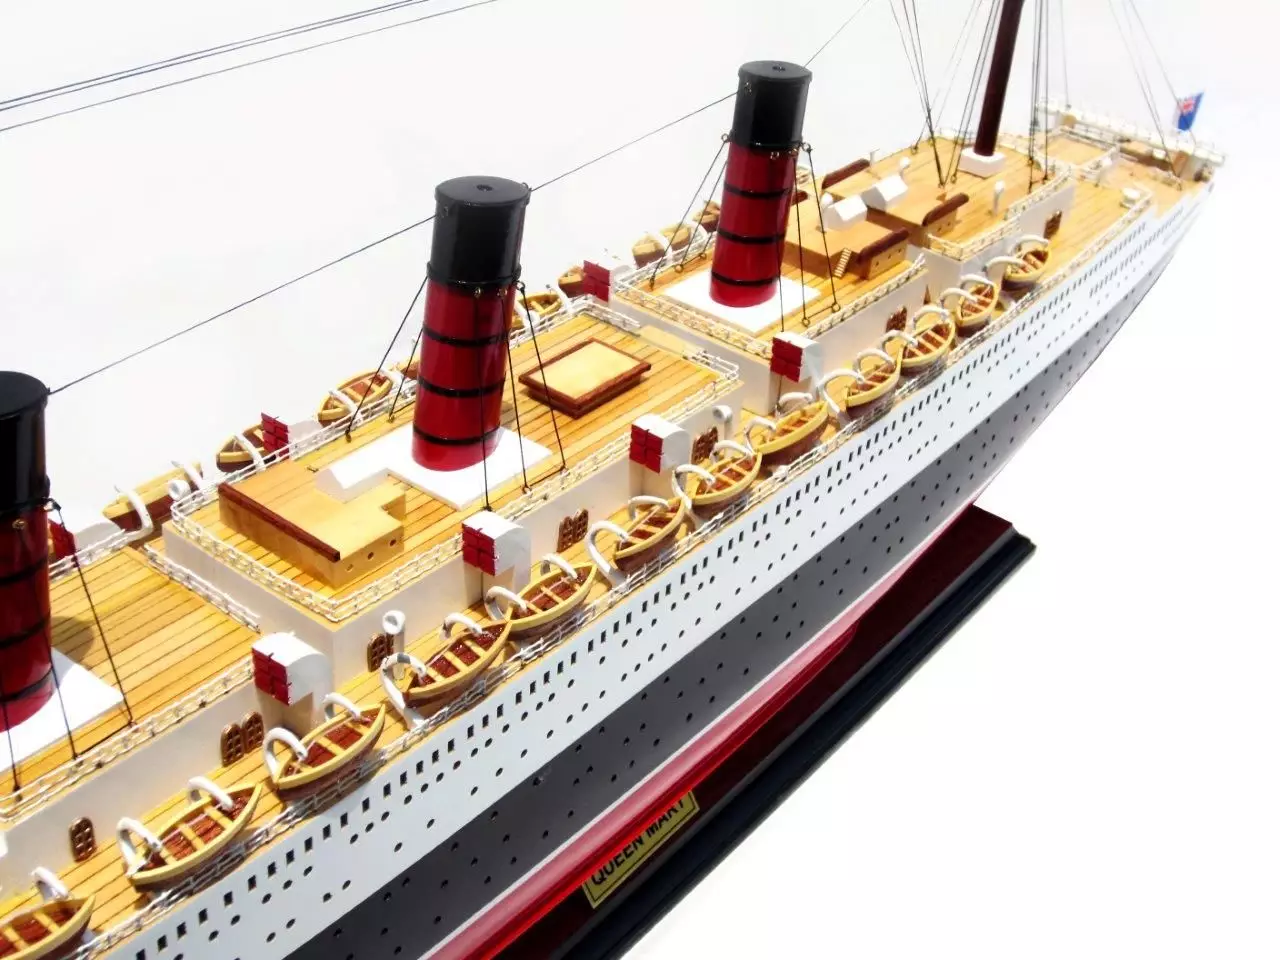 Queen Mary Model Boat - GN